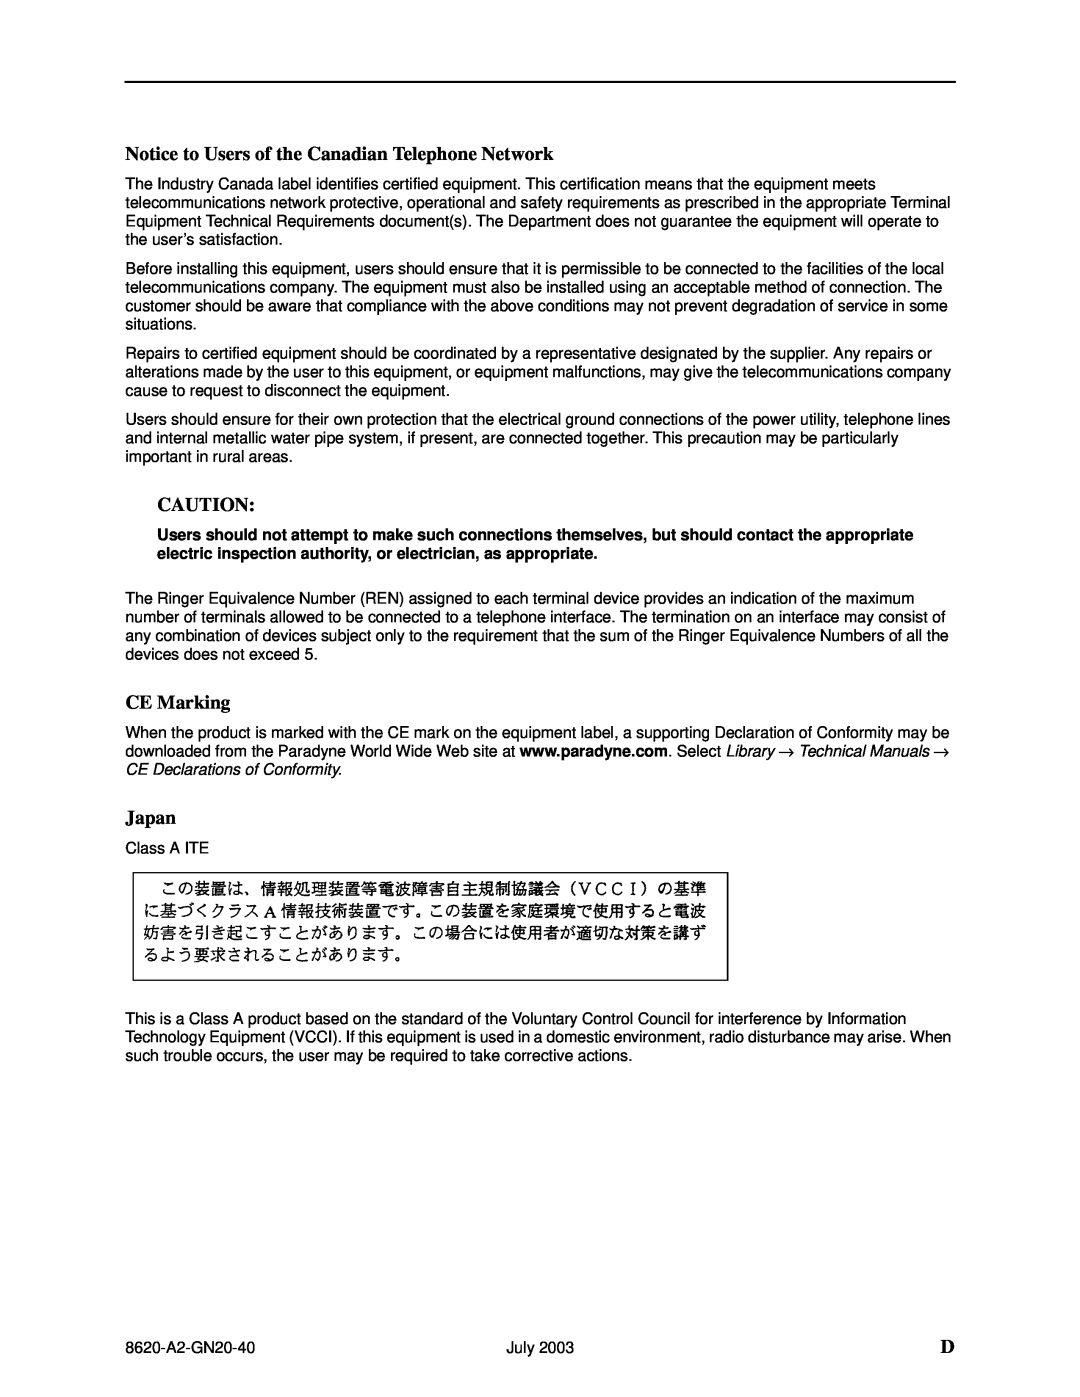 Paradyne Hotwire 8620 GranDSLAM Installation Guide Notice to Users of the Canadian Telephone Network, CE Marking, Japan 